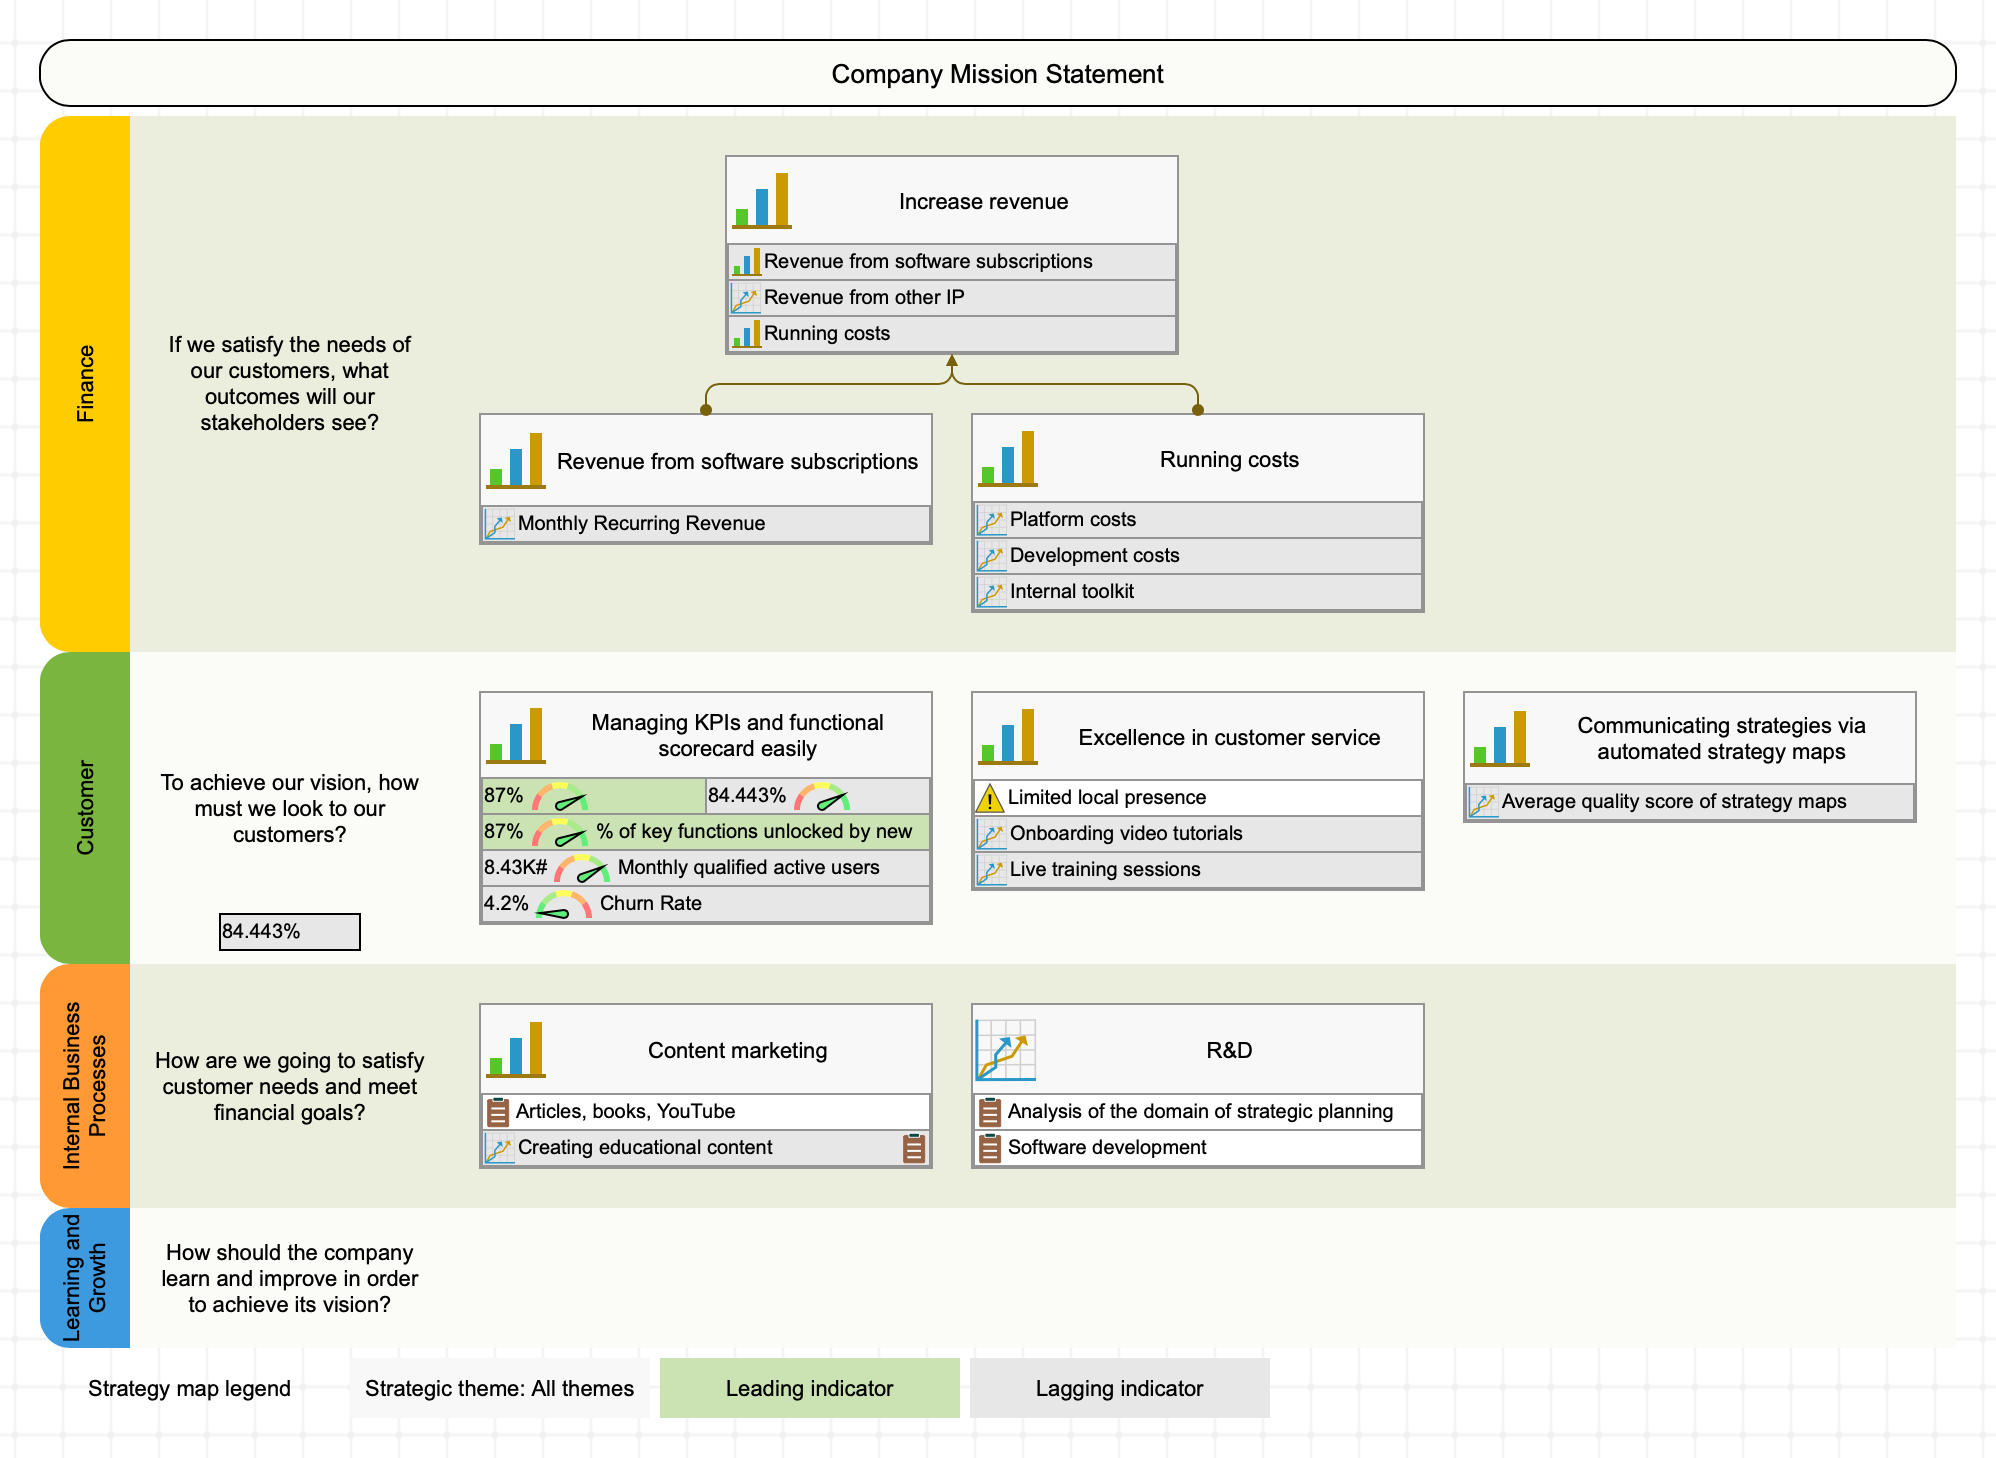 Balanced Scorecard strategy map automatically created using the elements of the business model canvas.